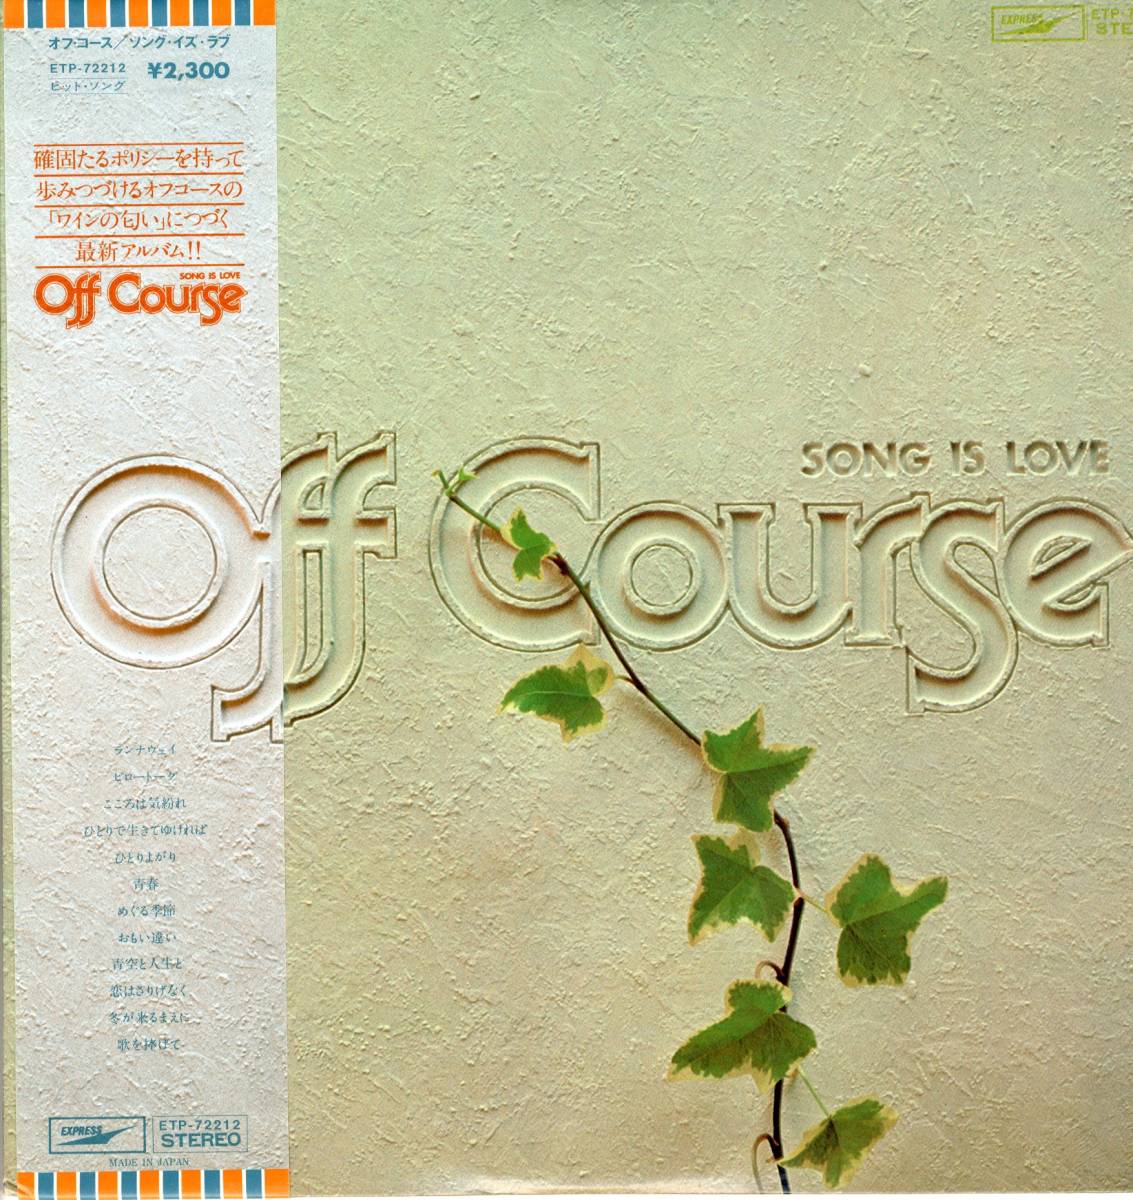 LP オフ・コース / ソング・イズ・ラブ Off Course / SONG IS LOVE【J-105】の画像1